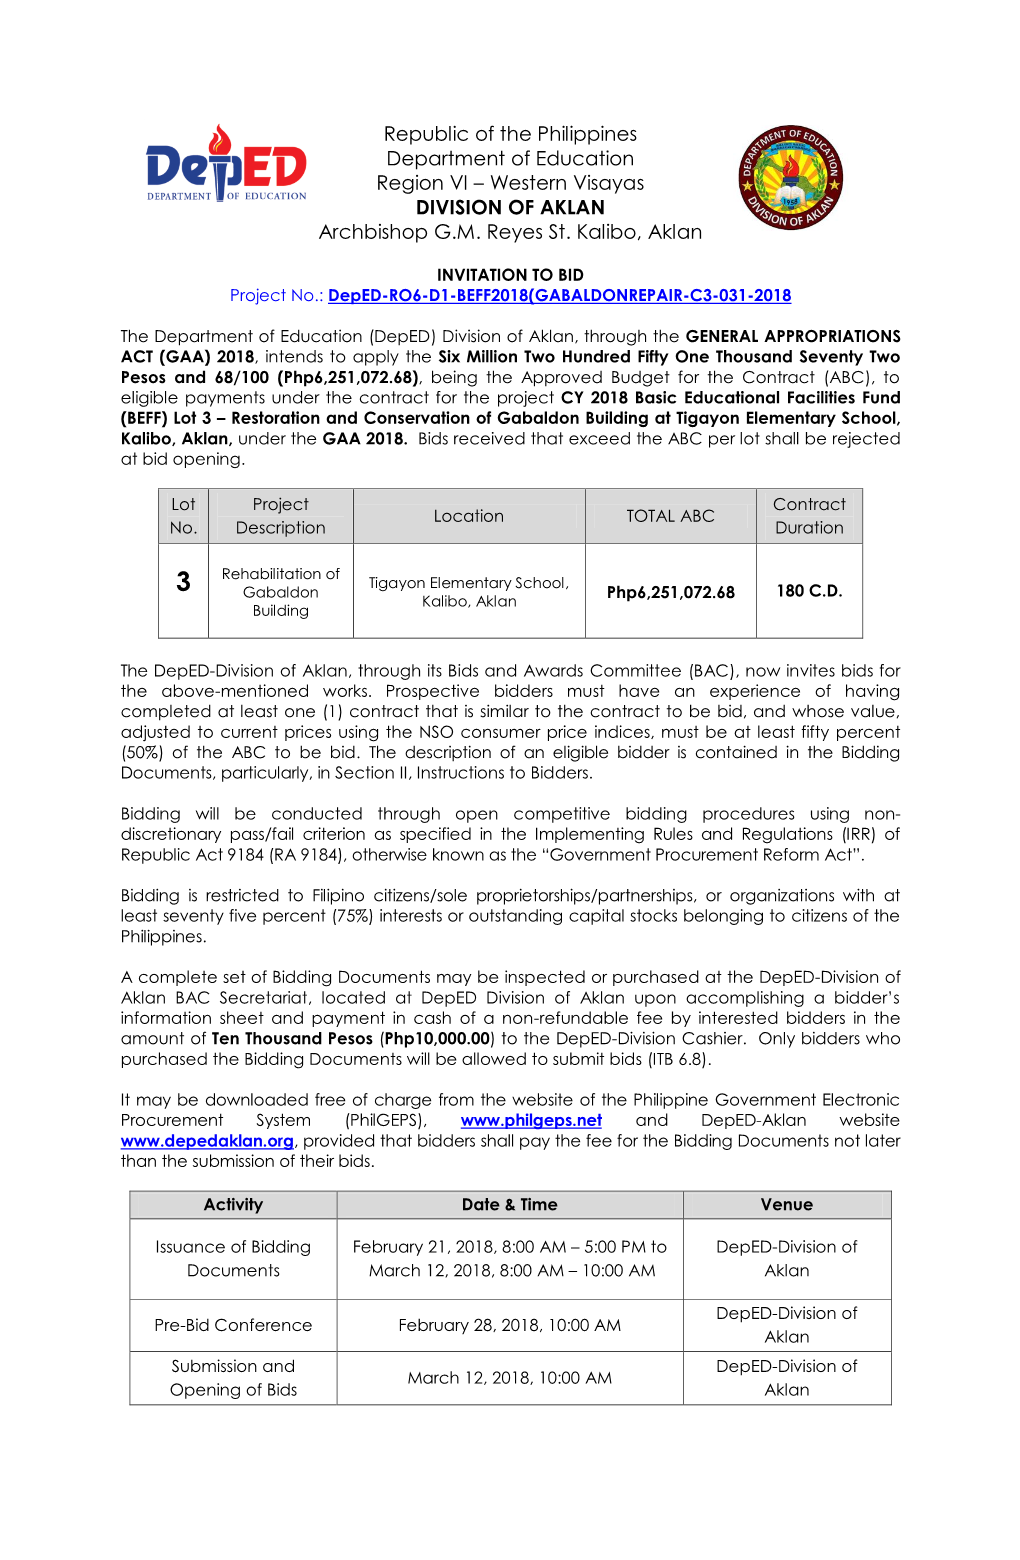 Republic of the Philippines Department of Education Region VI – Western Visayas DIVISION of AKLAN Archbishop G.M